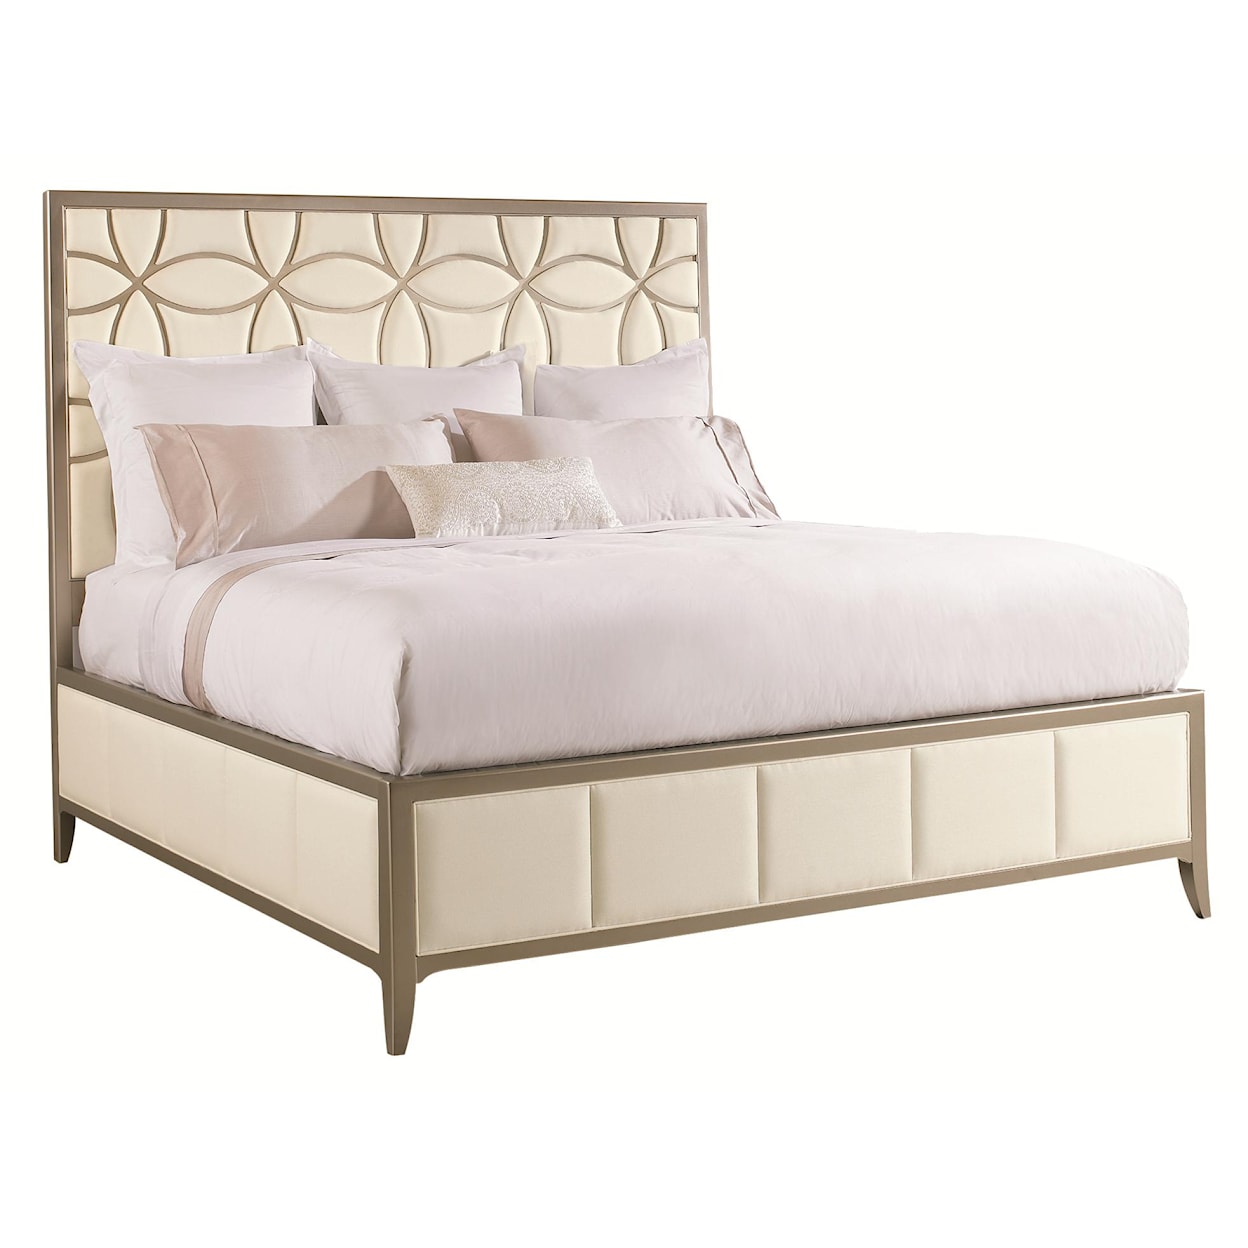 Caracole Classic Contemporary Queen Size Sleeping Beauty Bed